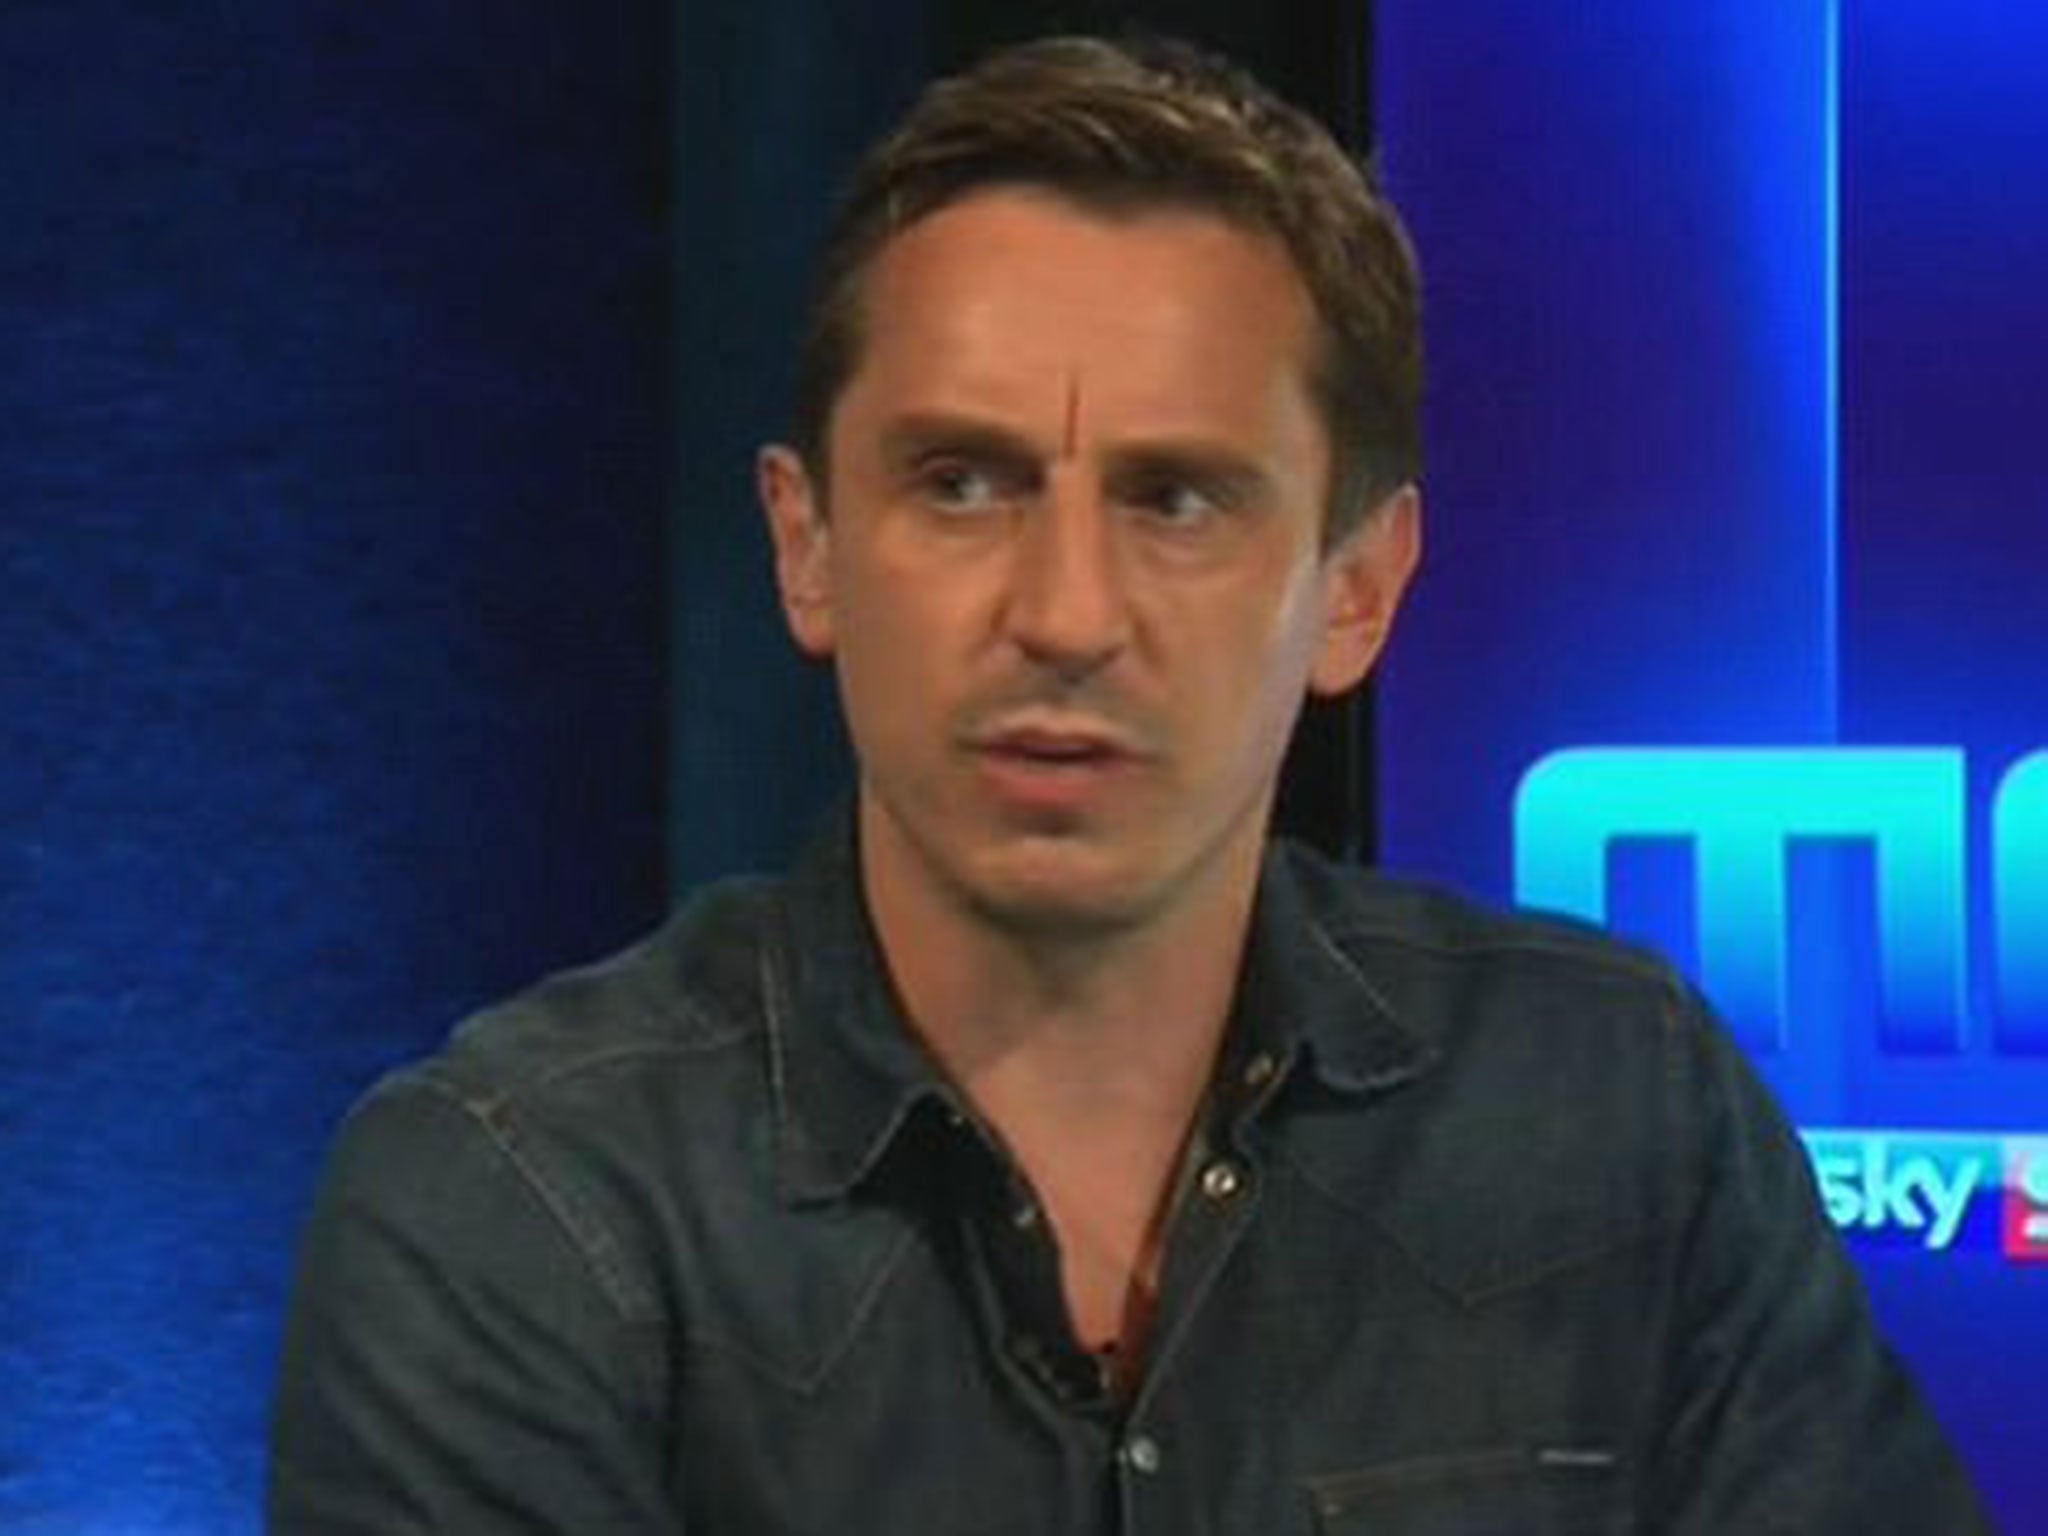 Gary Neville questioned if the timing of John Terry's announcement helped or hindered Chelsea's title challenge